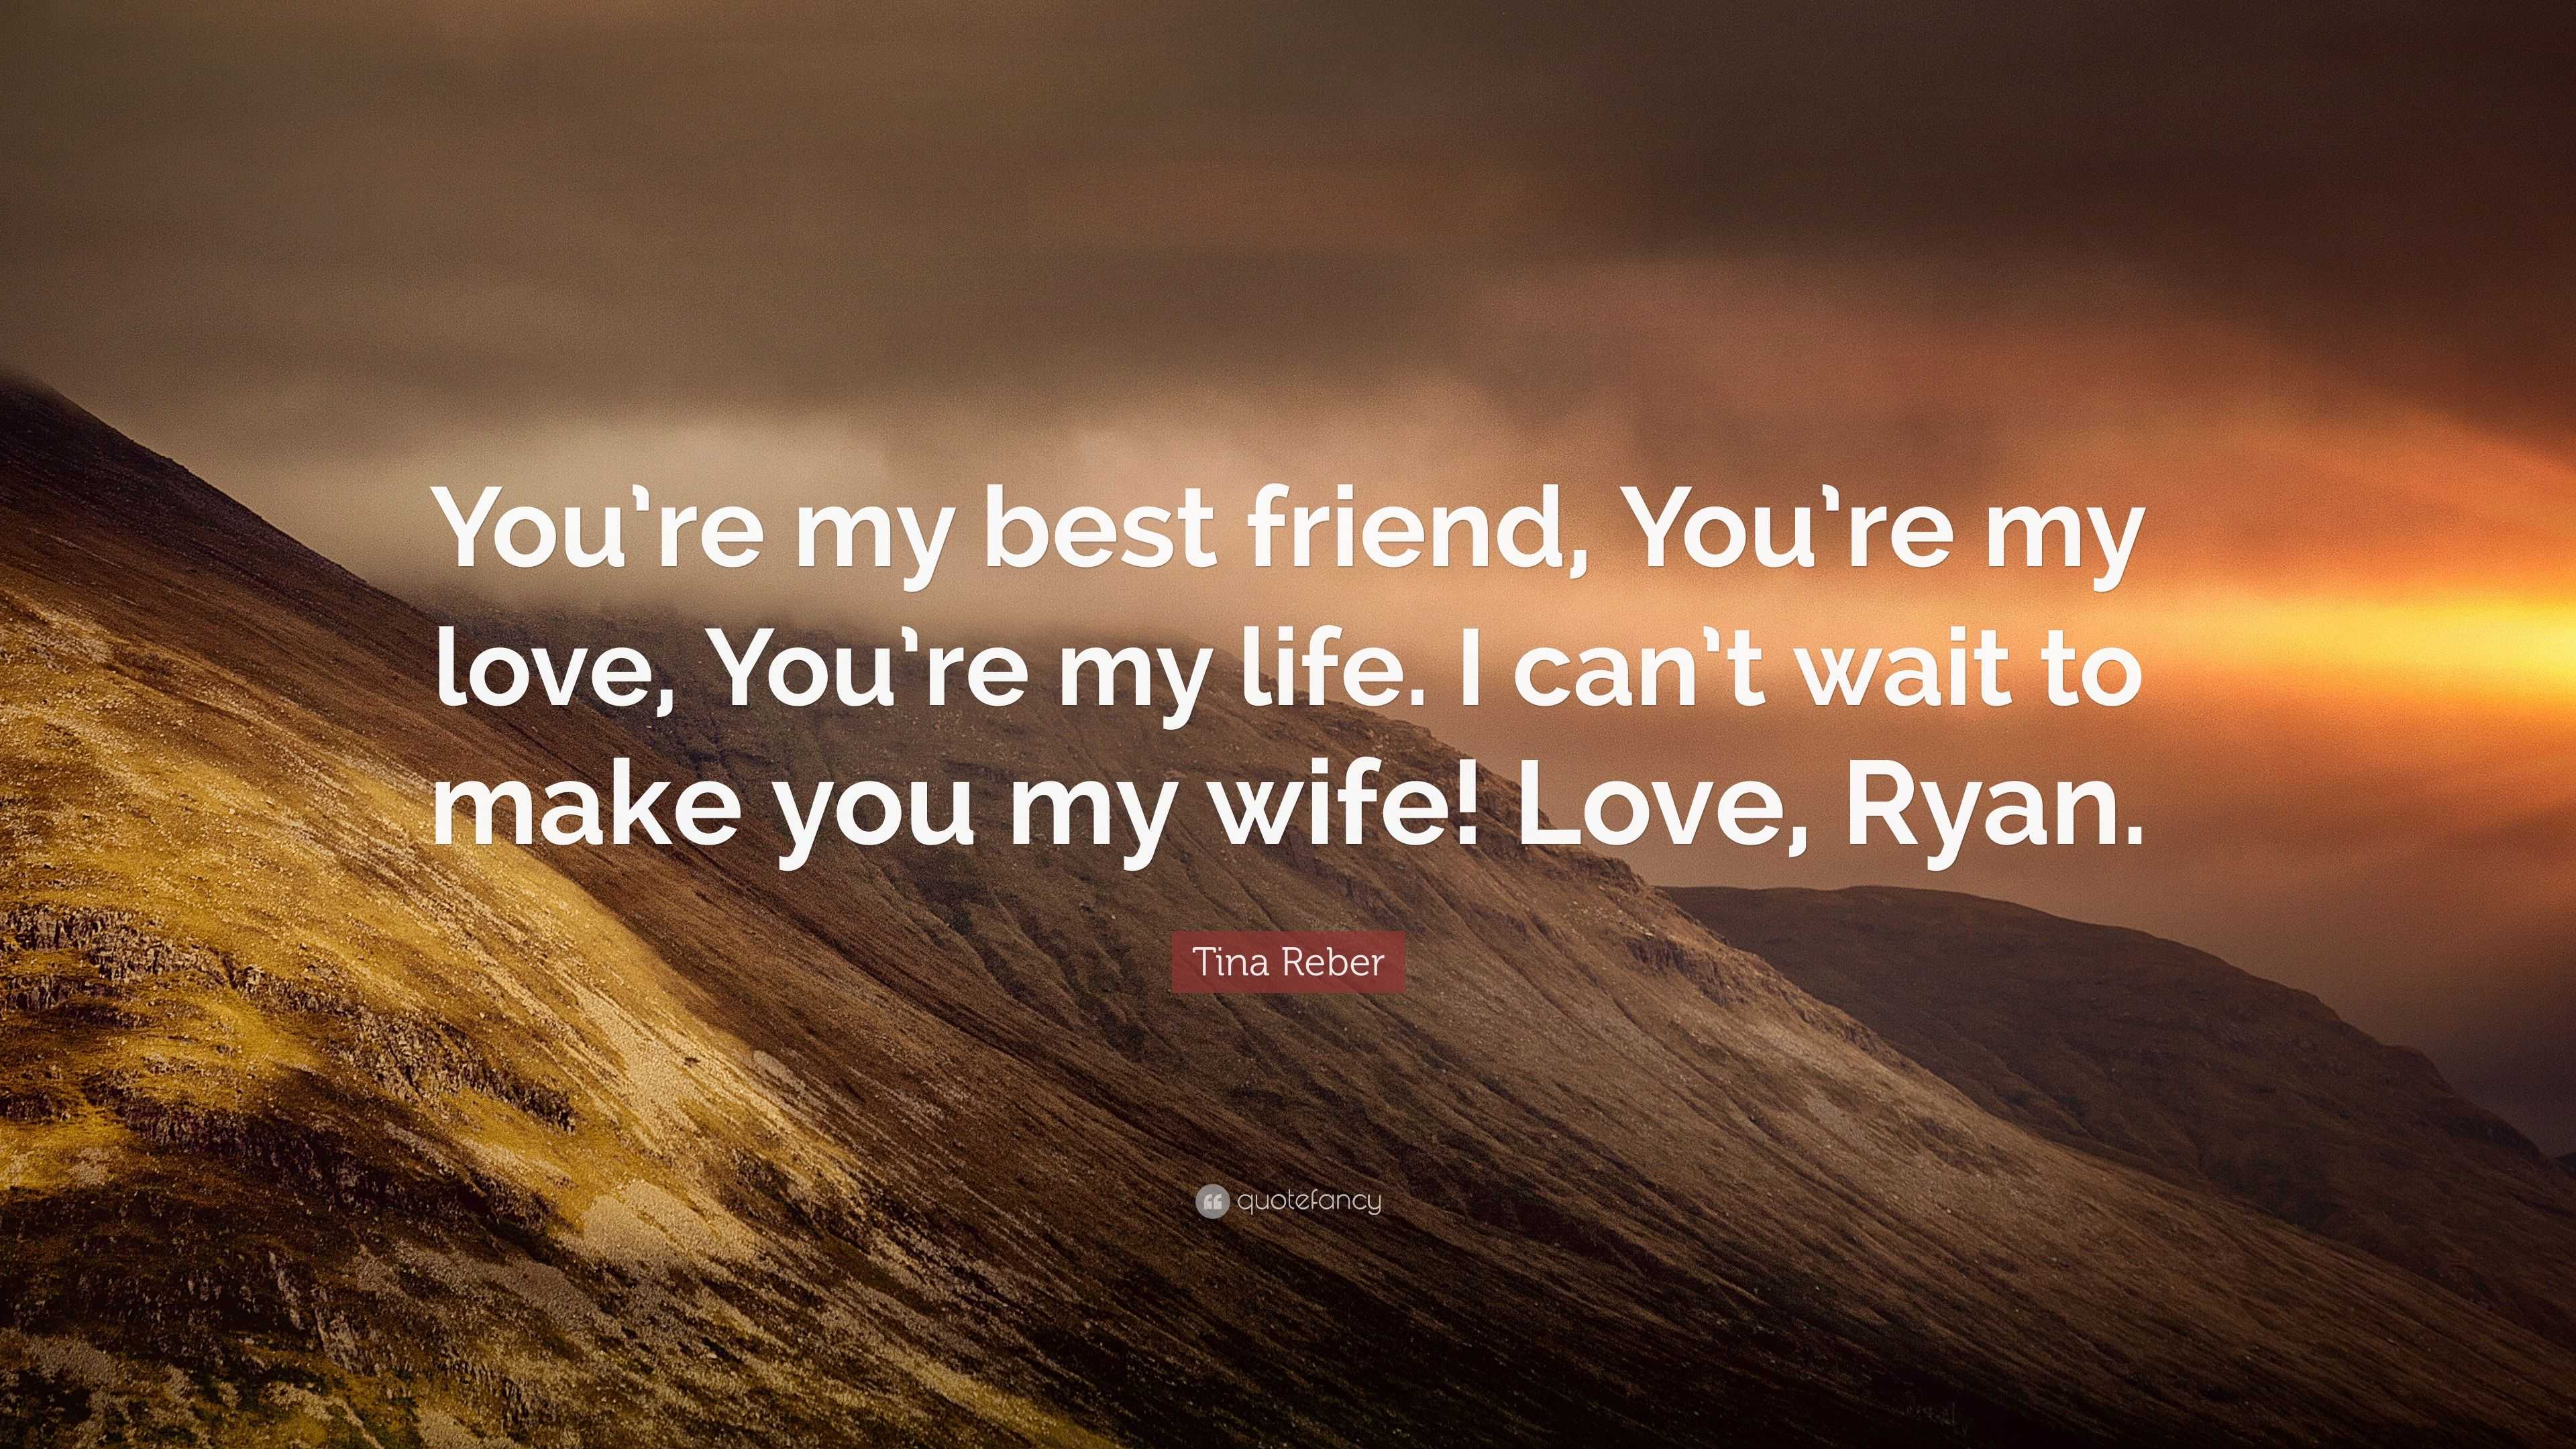 Tina Reber Quote: "You're my best friend, You're my love ...